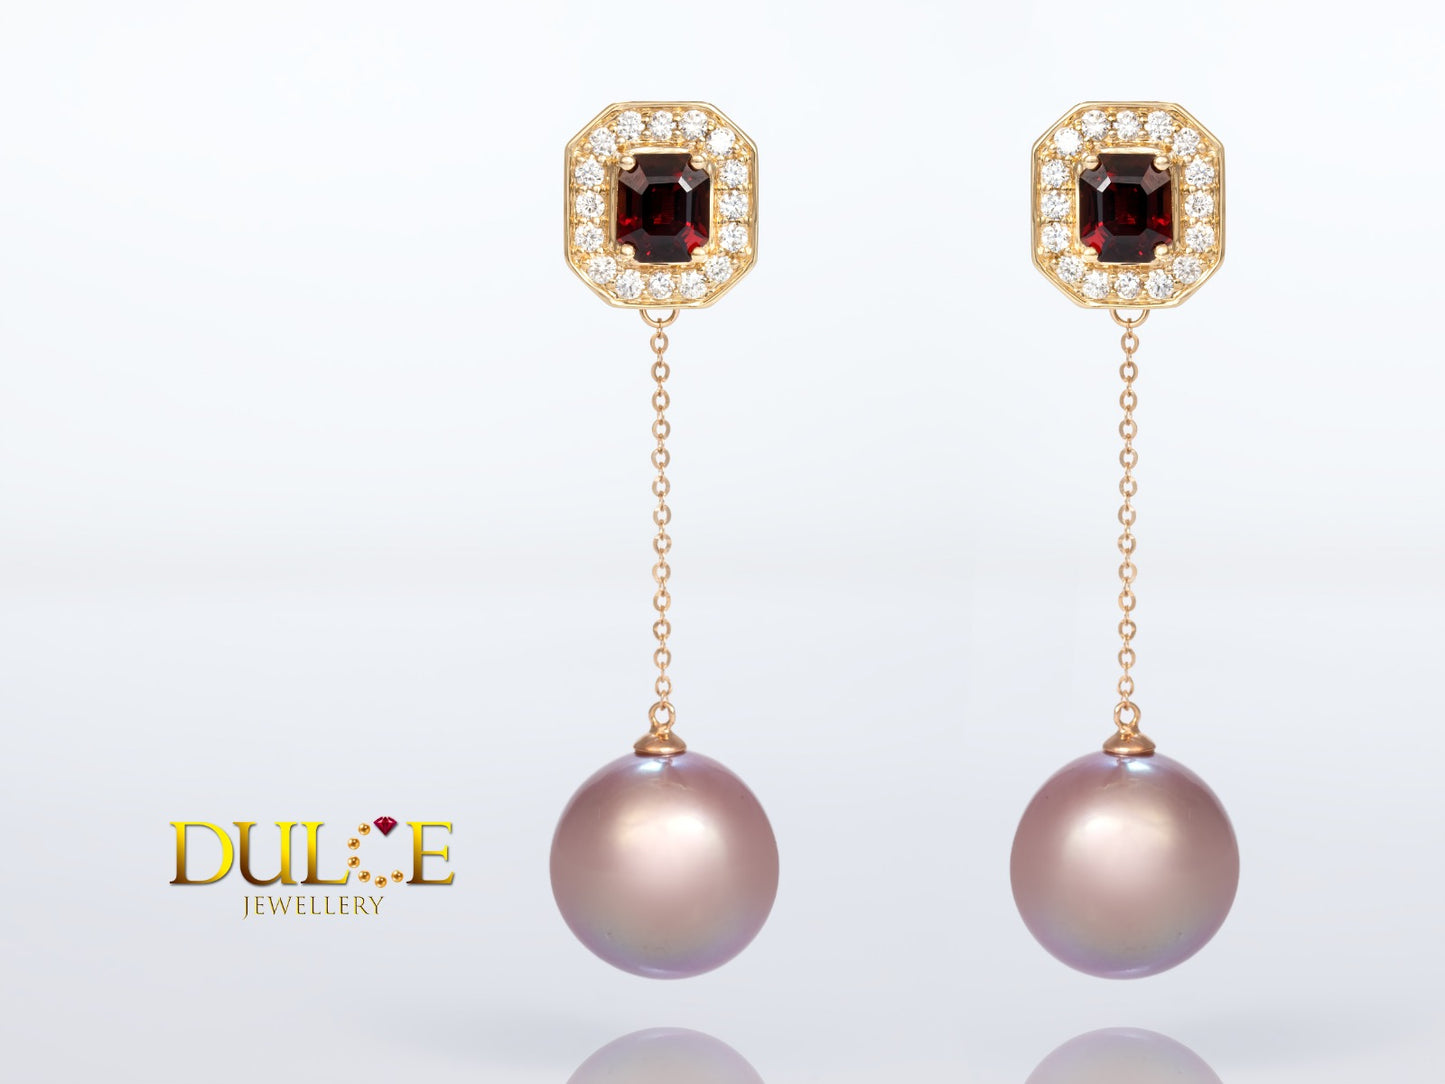 18K Gold Red Spinel Diamond Earrings (GERSPINEL2764) (Pearls not included)